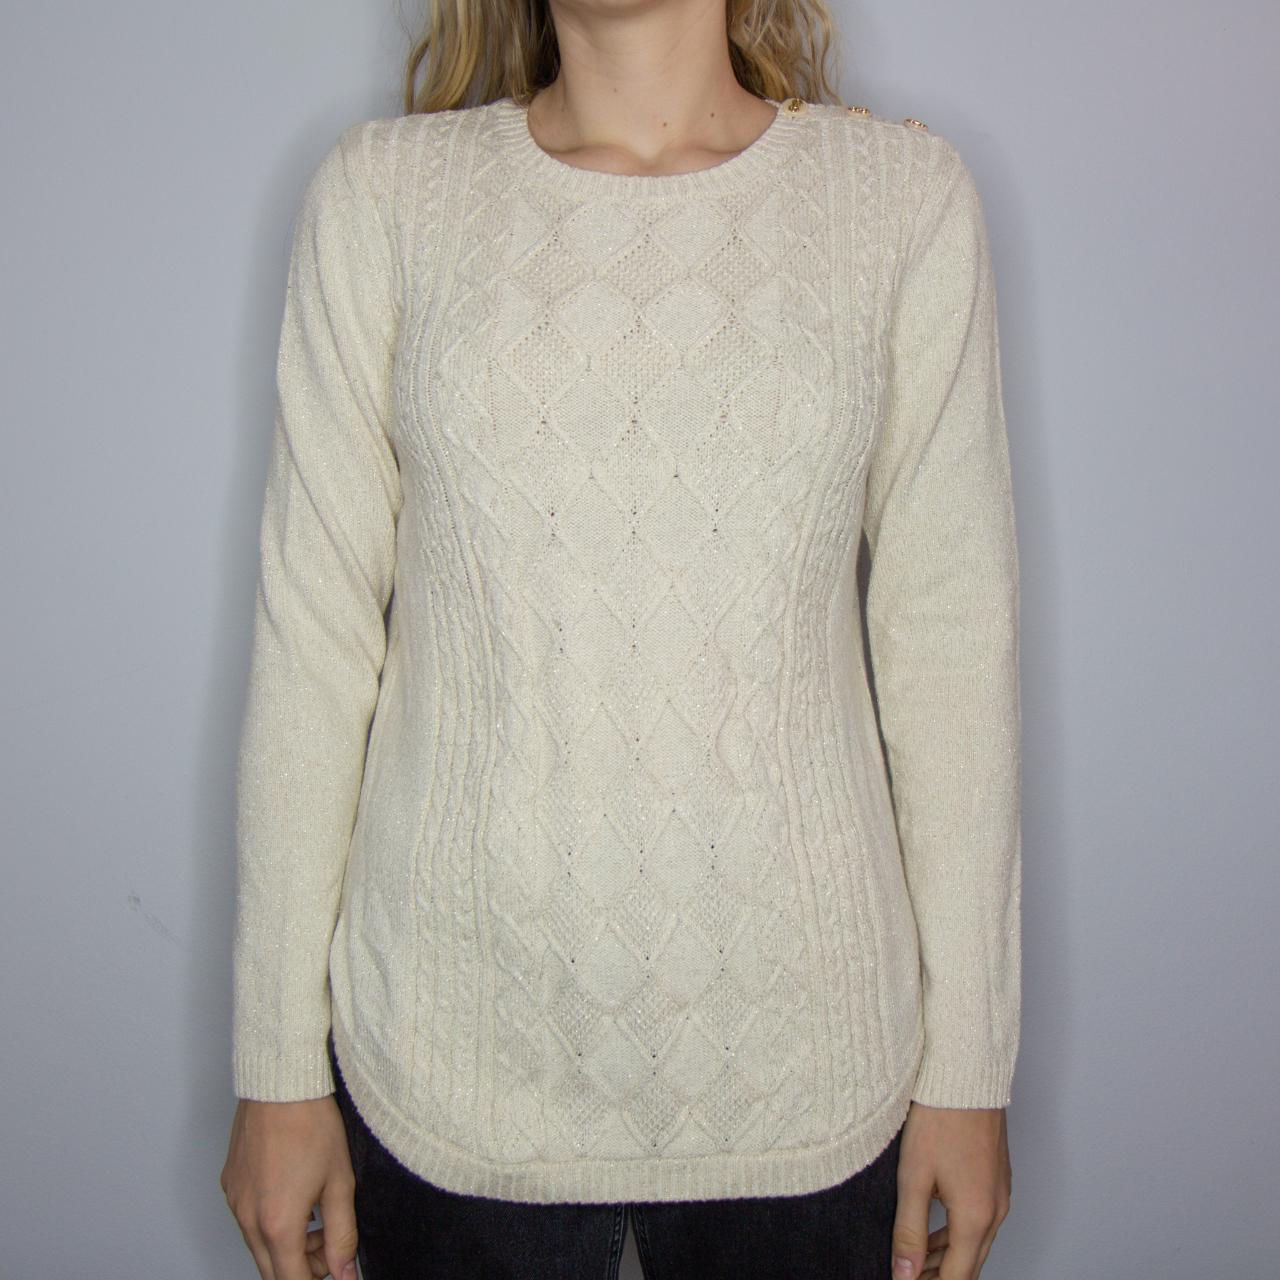 Product Image 2 - cream knit sweater with gold